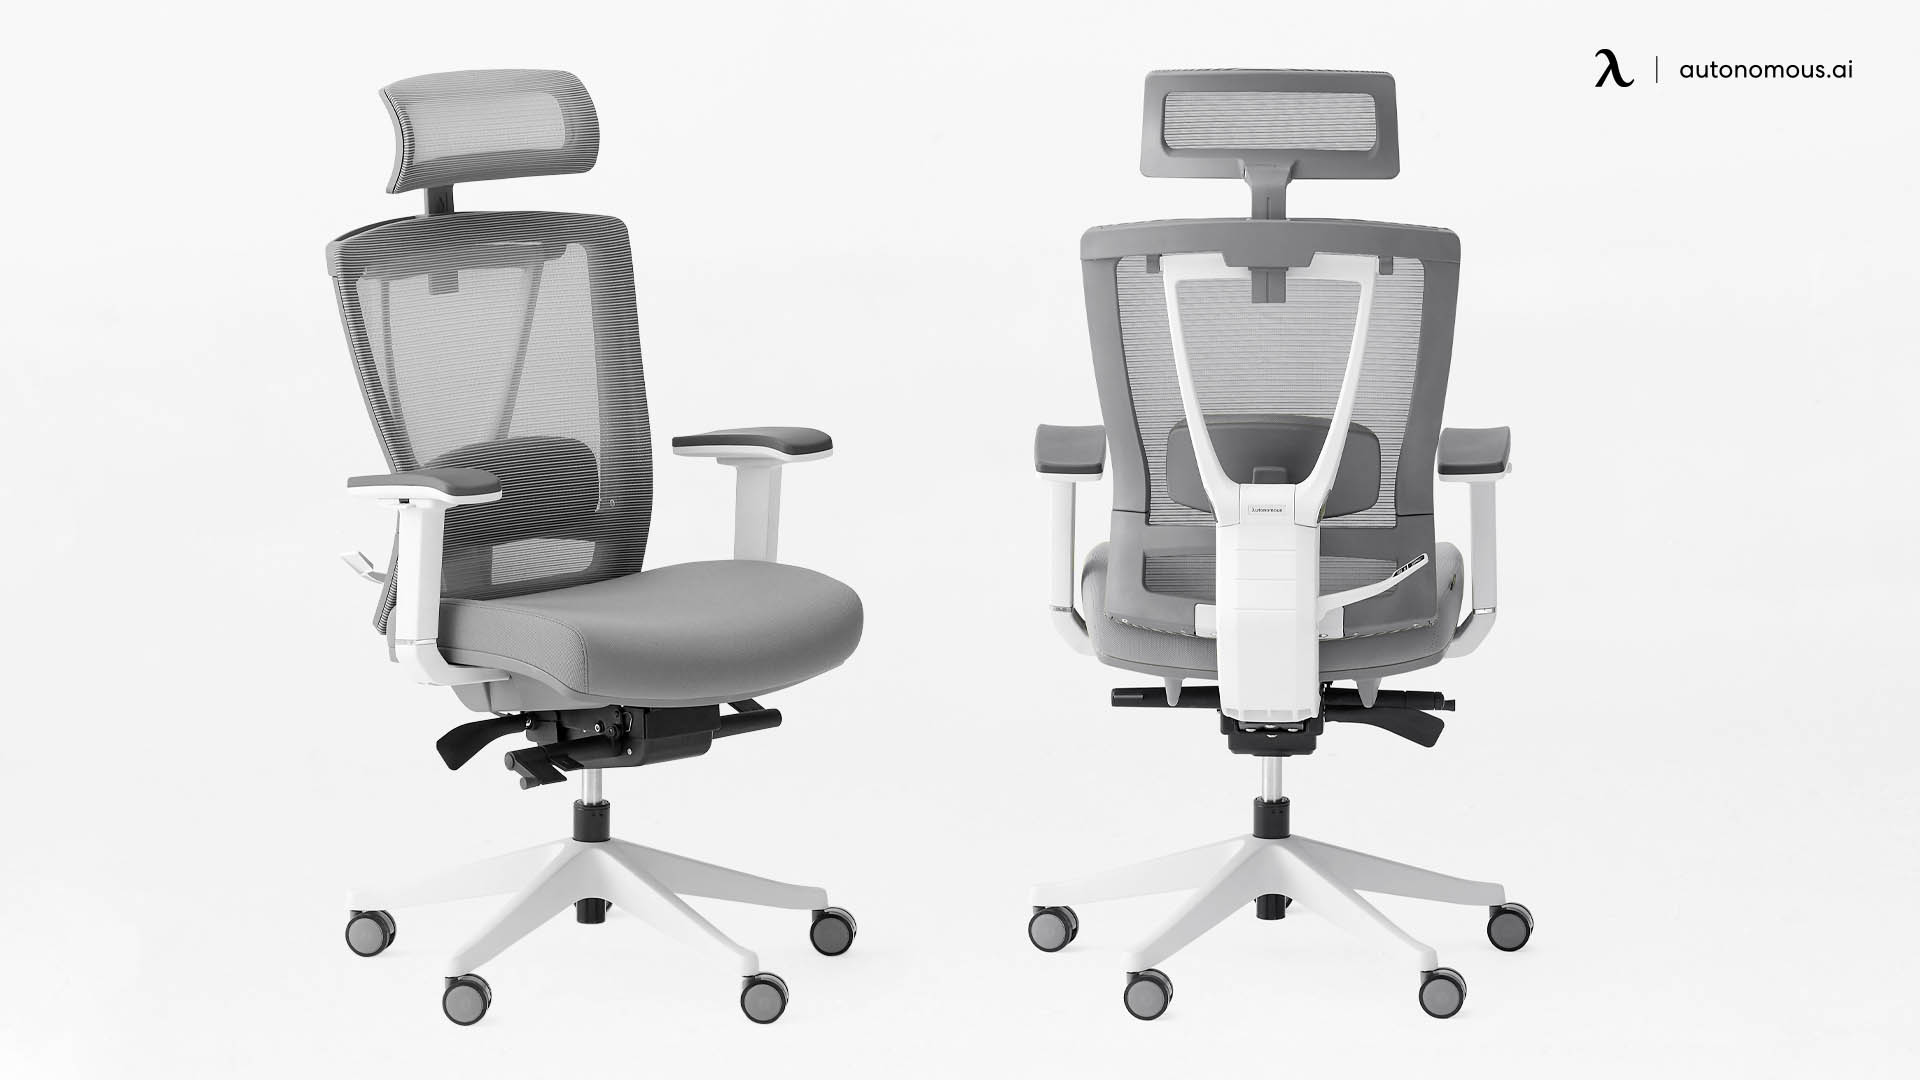 The 10 Best Ergonomic Chairs In Australia For 2021